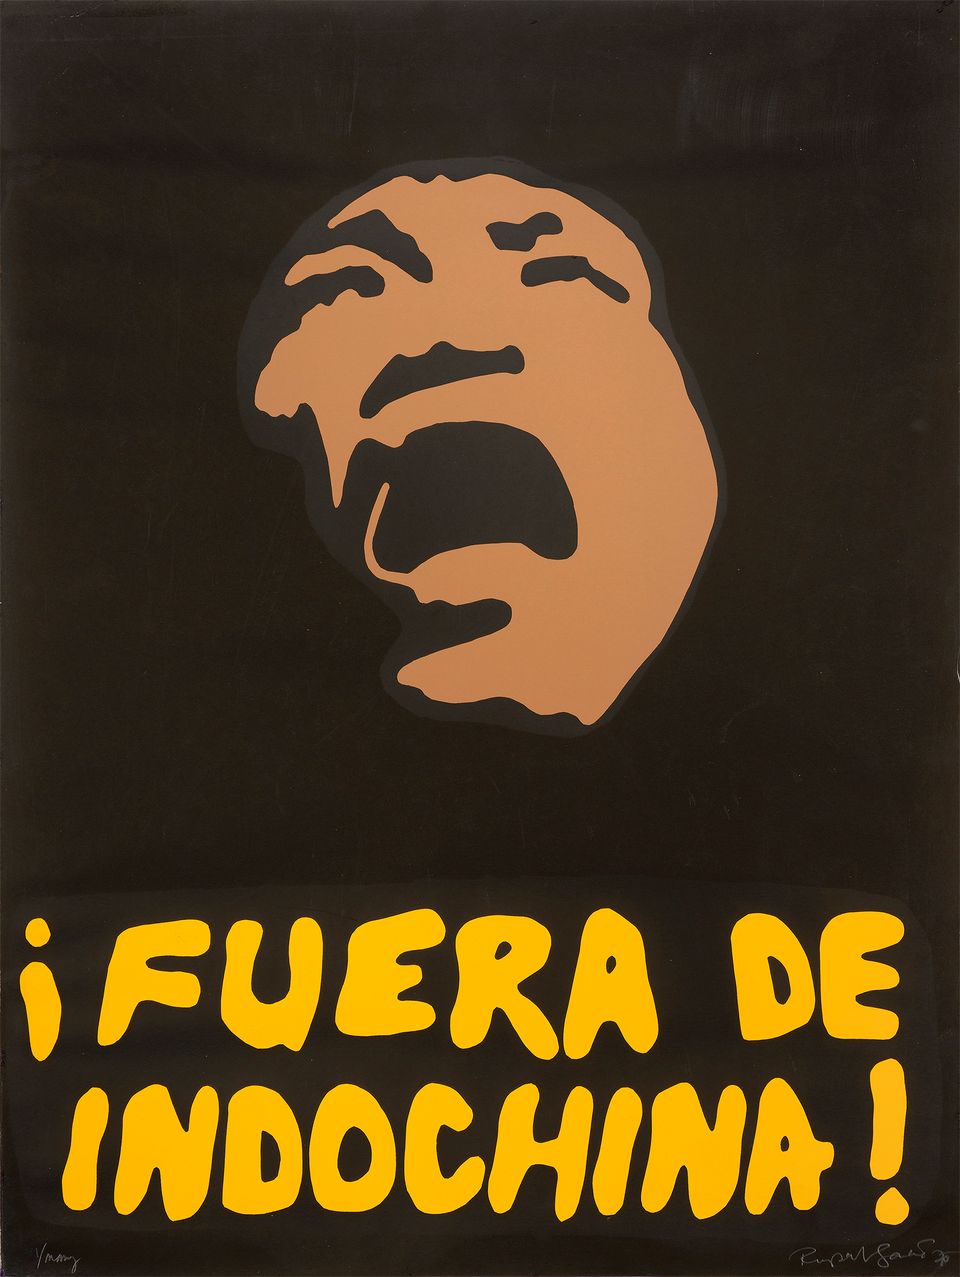 A screenprint of a man yelling with ¡Fuera de Indochina! printed underneath.